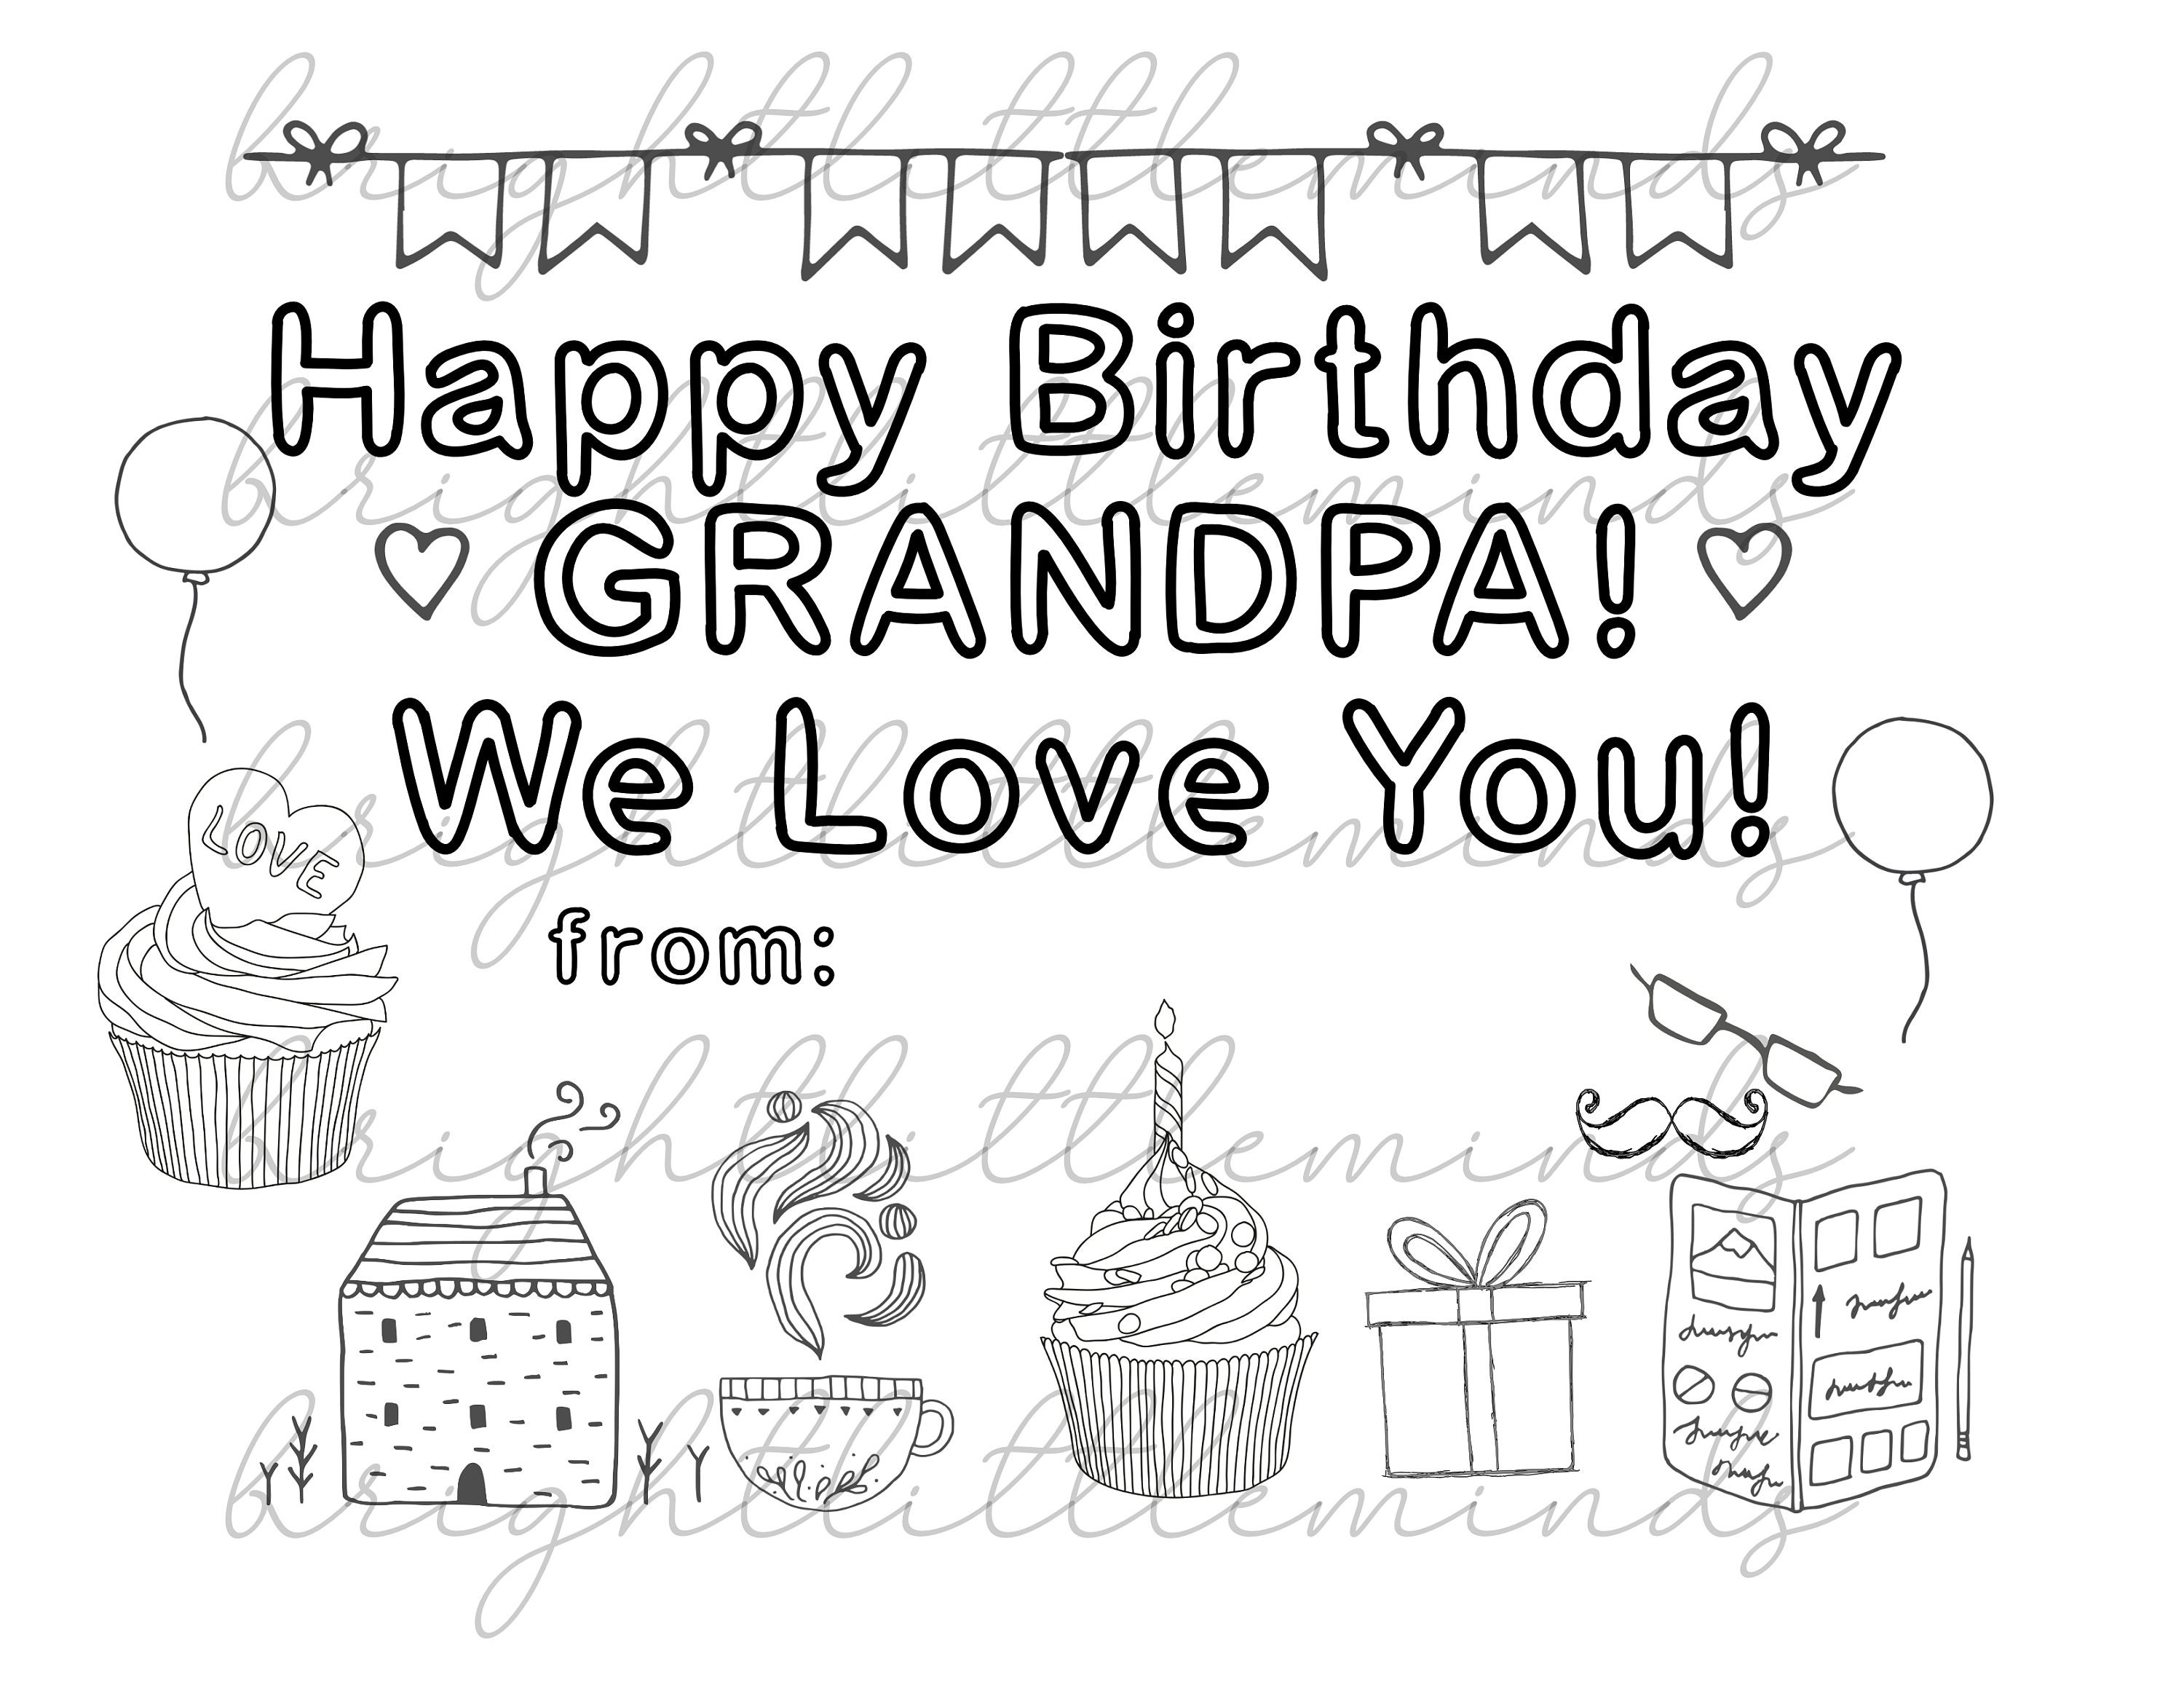 Instant download printable happy birthday grandpa diy kids activity coloring gift fun card made by kids letter a pdf